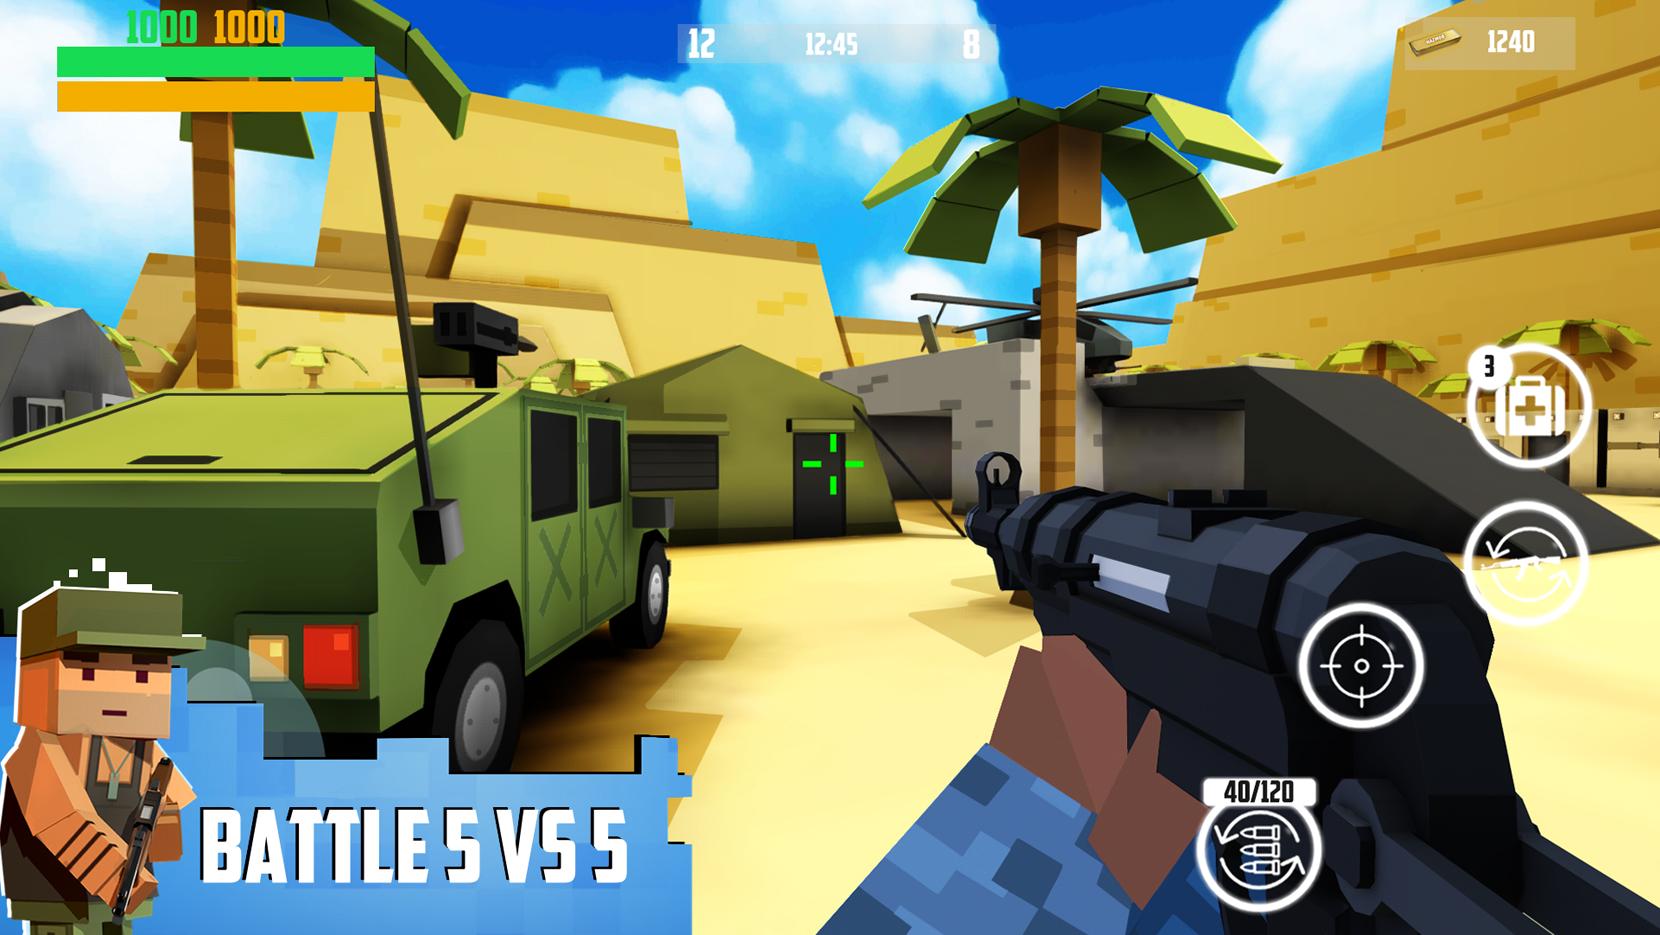 Special Ops: FPS PVP Gun Games - Apps on Google Play